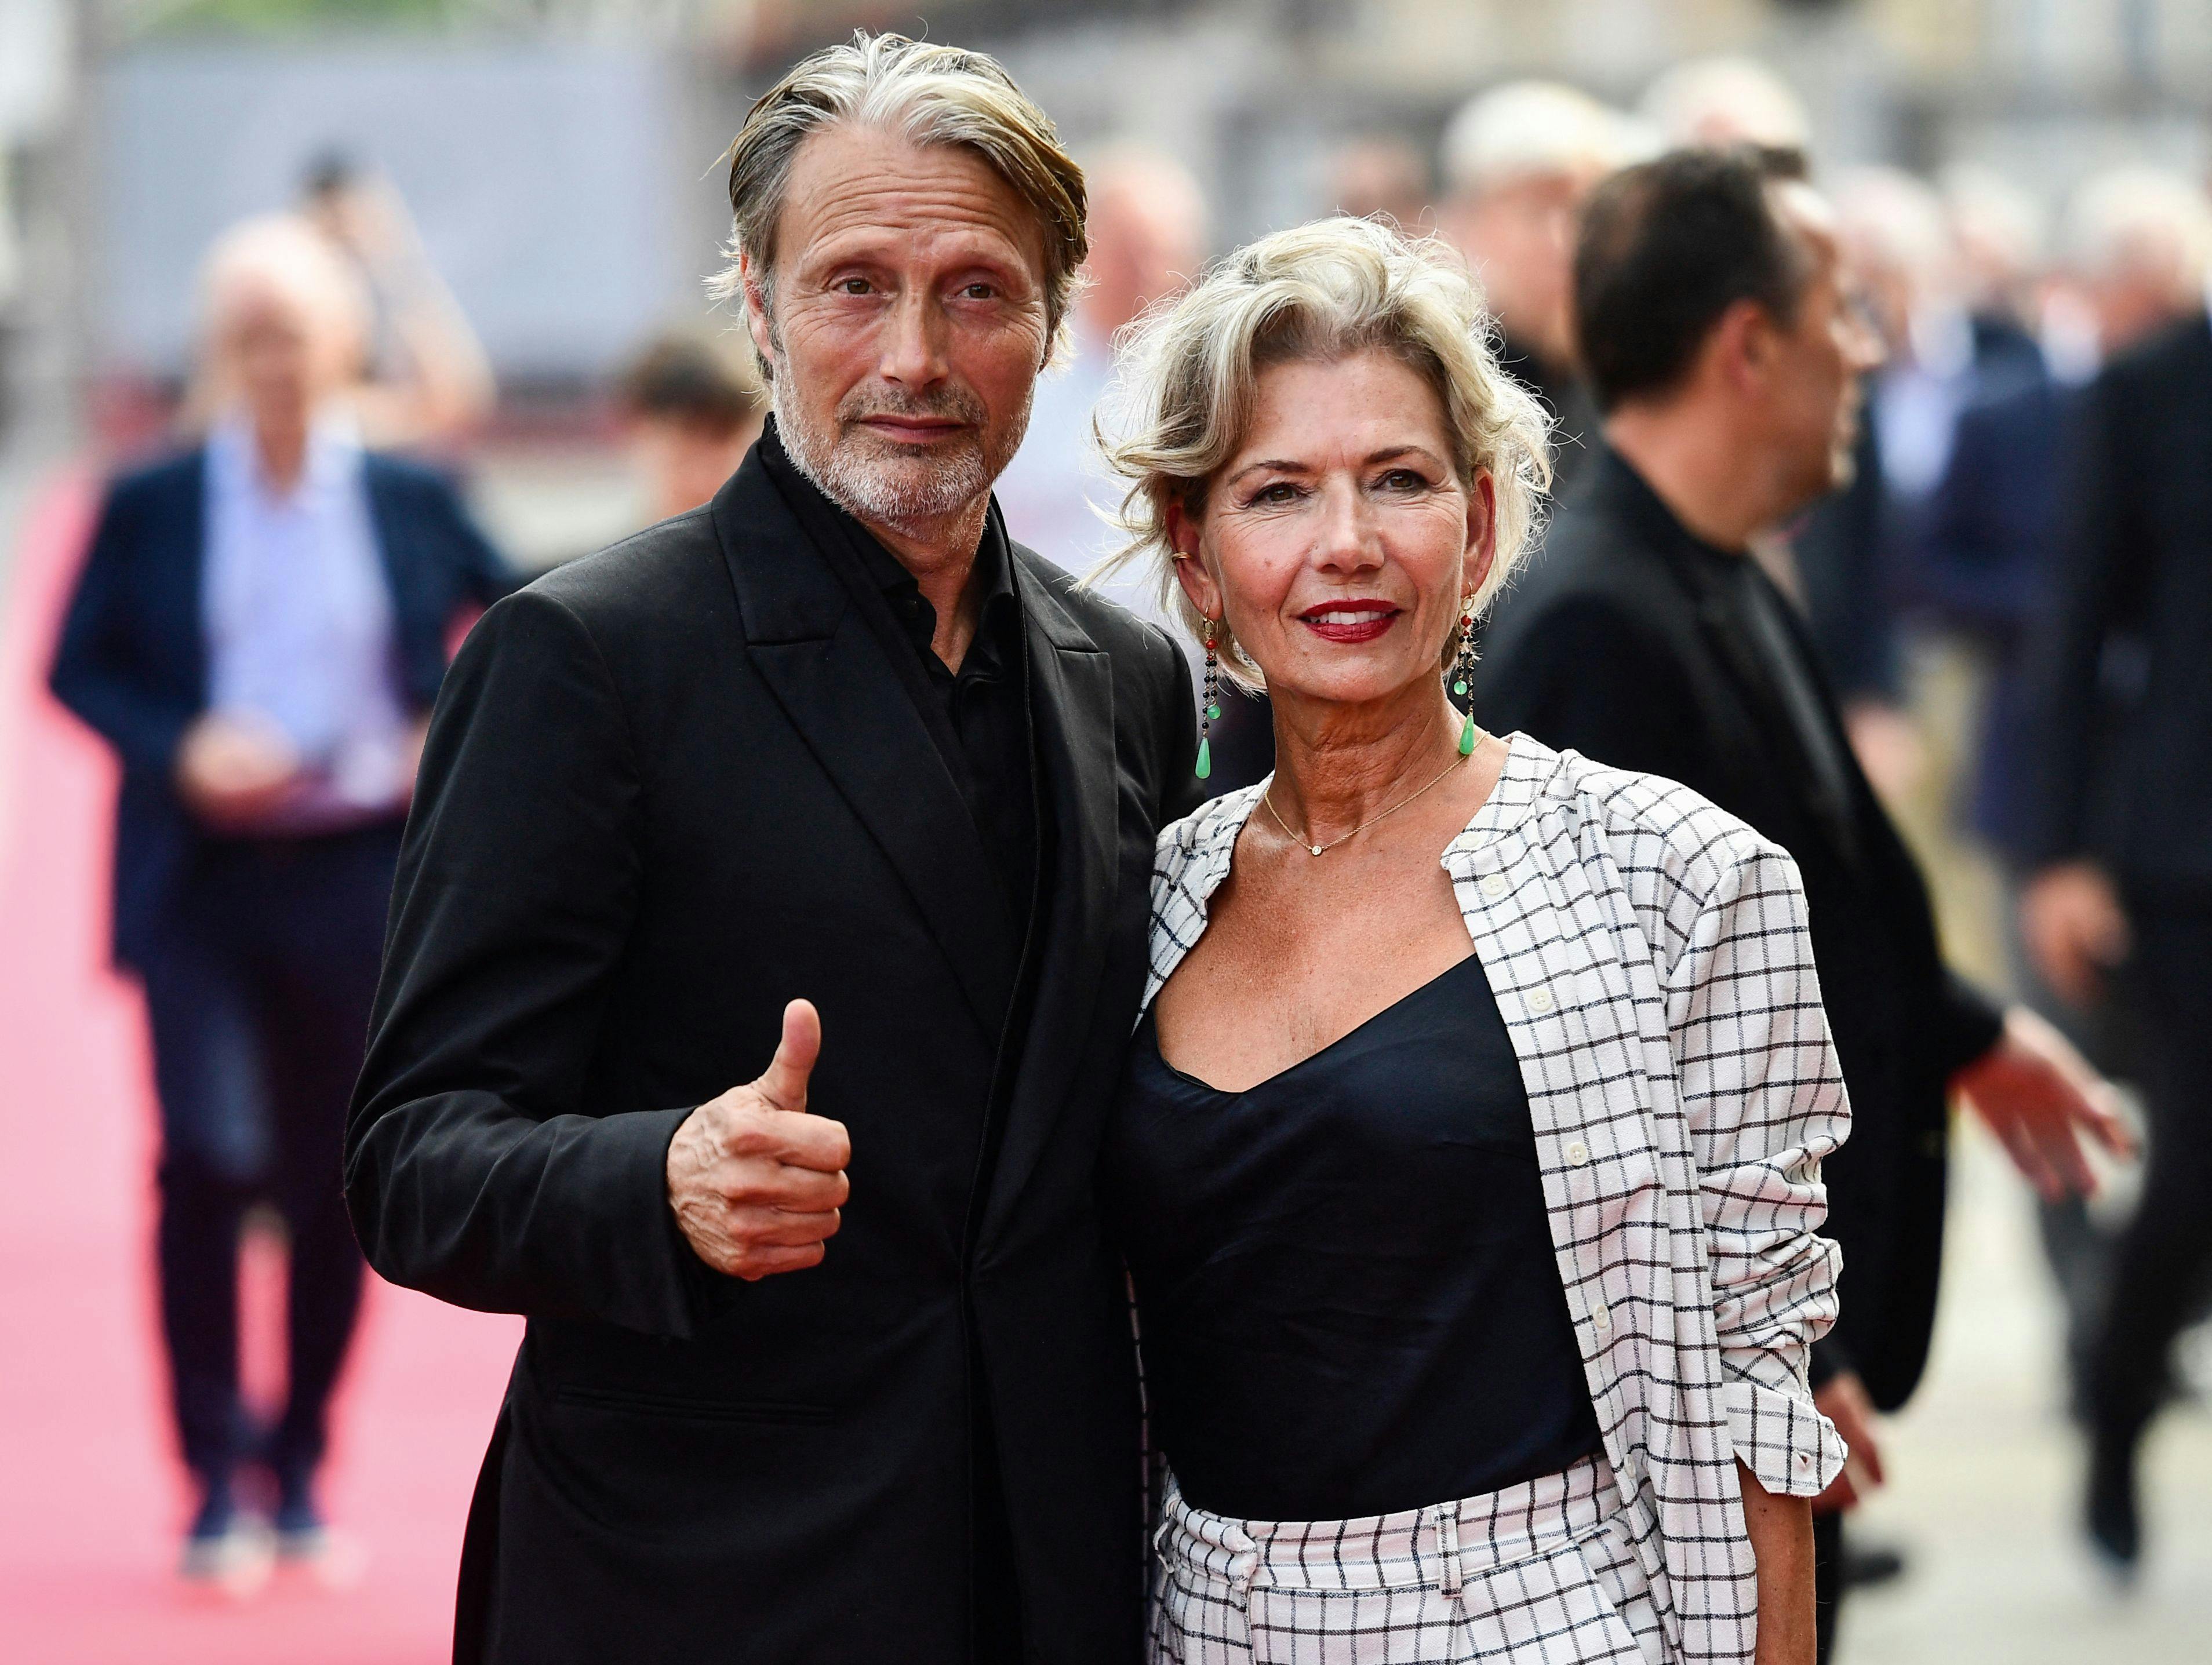 Danish actor Mads Mikkelsen (L) and Danish producer Tine Mikkelsen pose on the red carpet ahead of the screening of the film "Bastarden / The promised land" during the 71st edition of the San Sebastian Film Festival in the northern Spanish Basque city of San Sebastian on September 26, 2023. (Photo by ANDER GILLENEA / AFP)